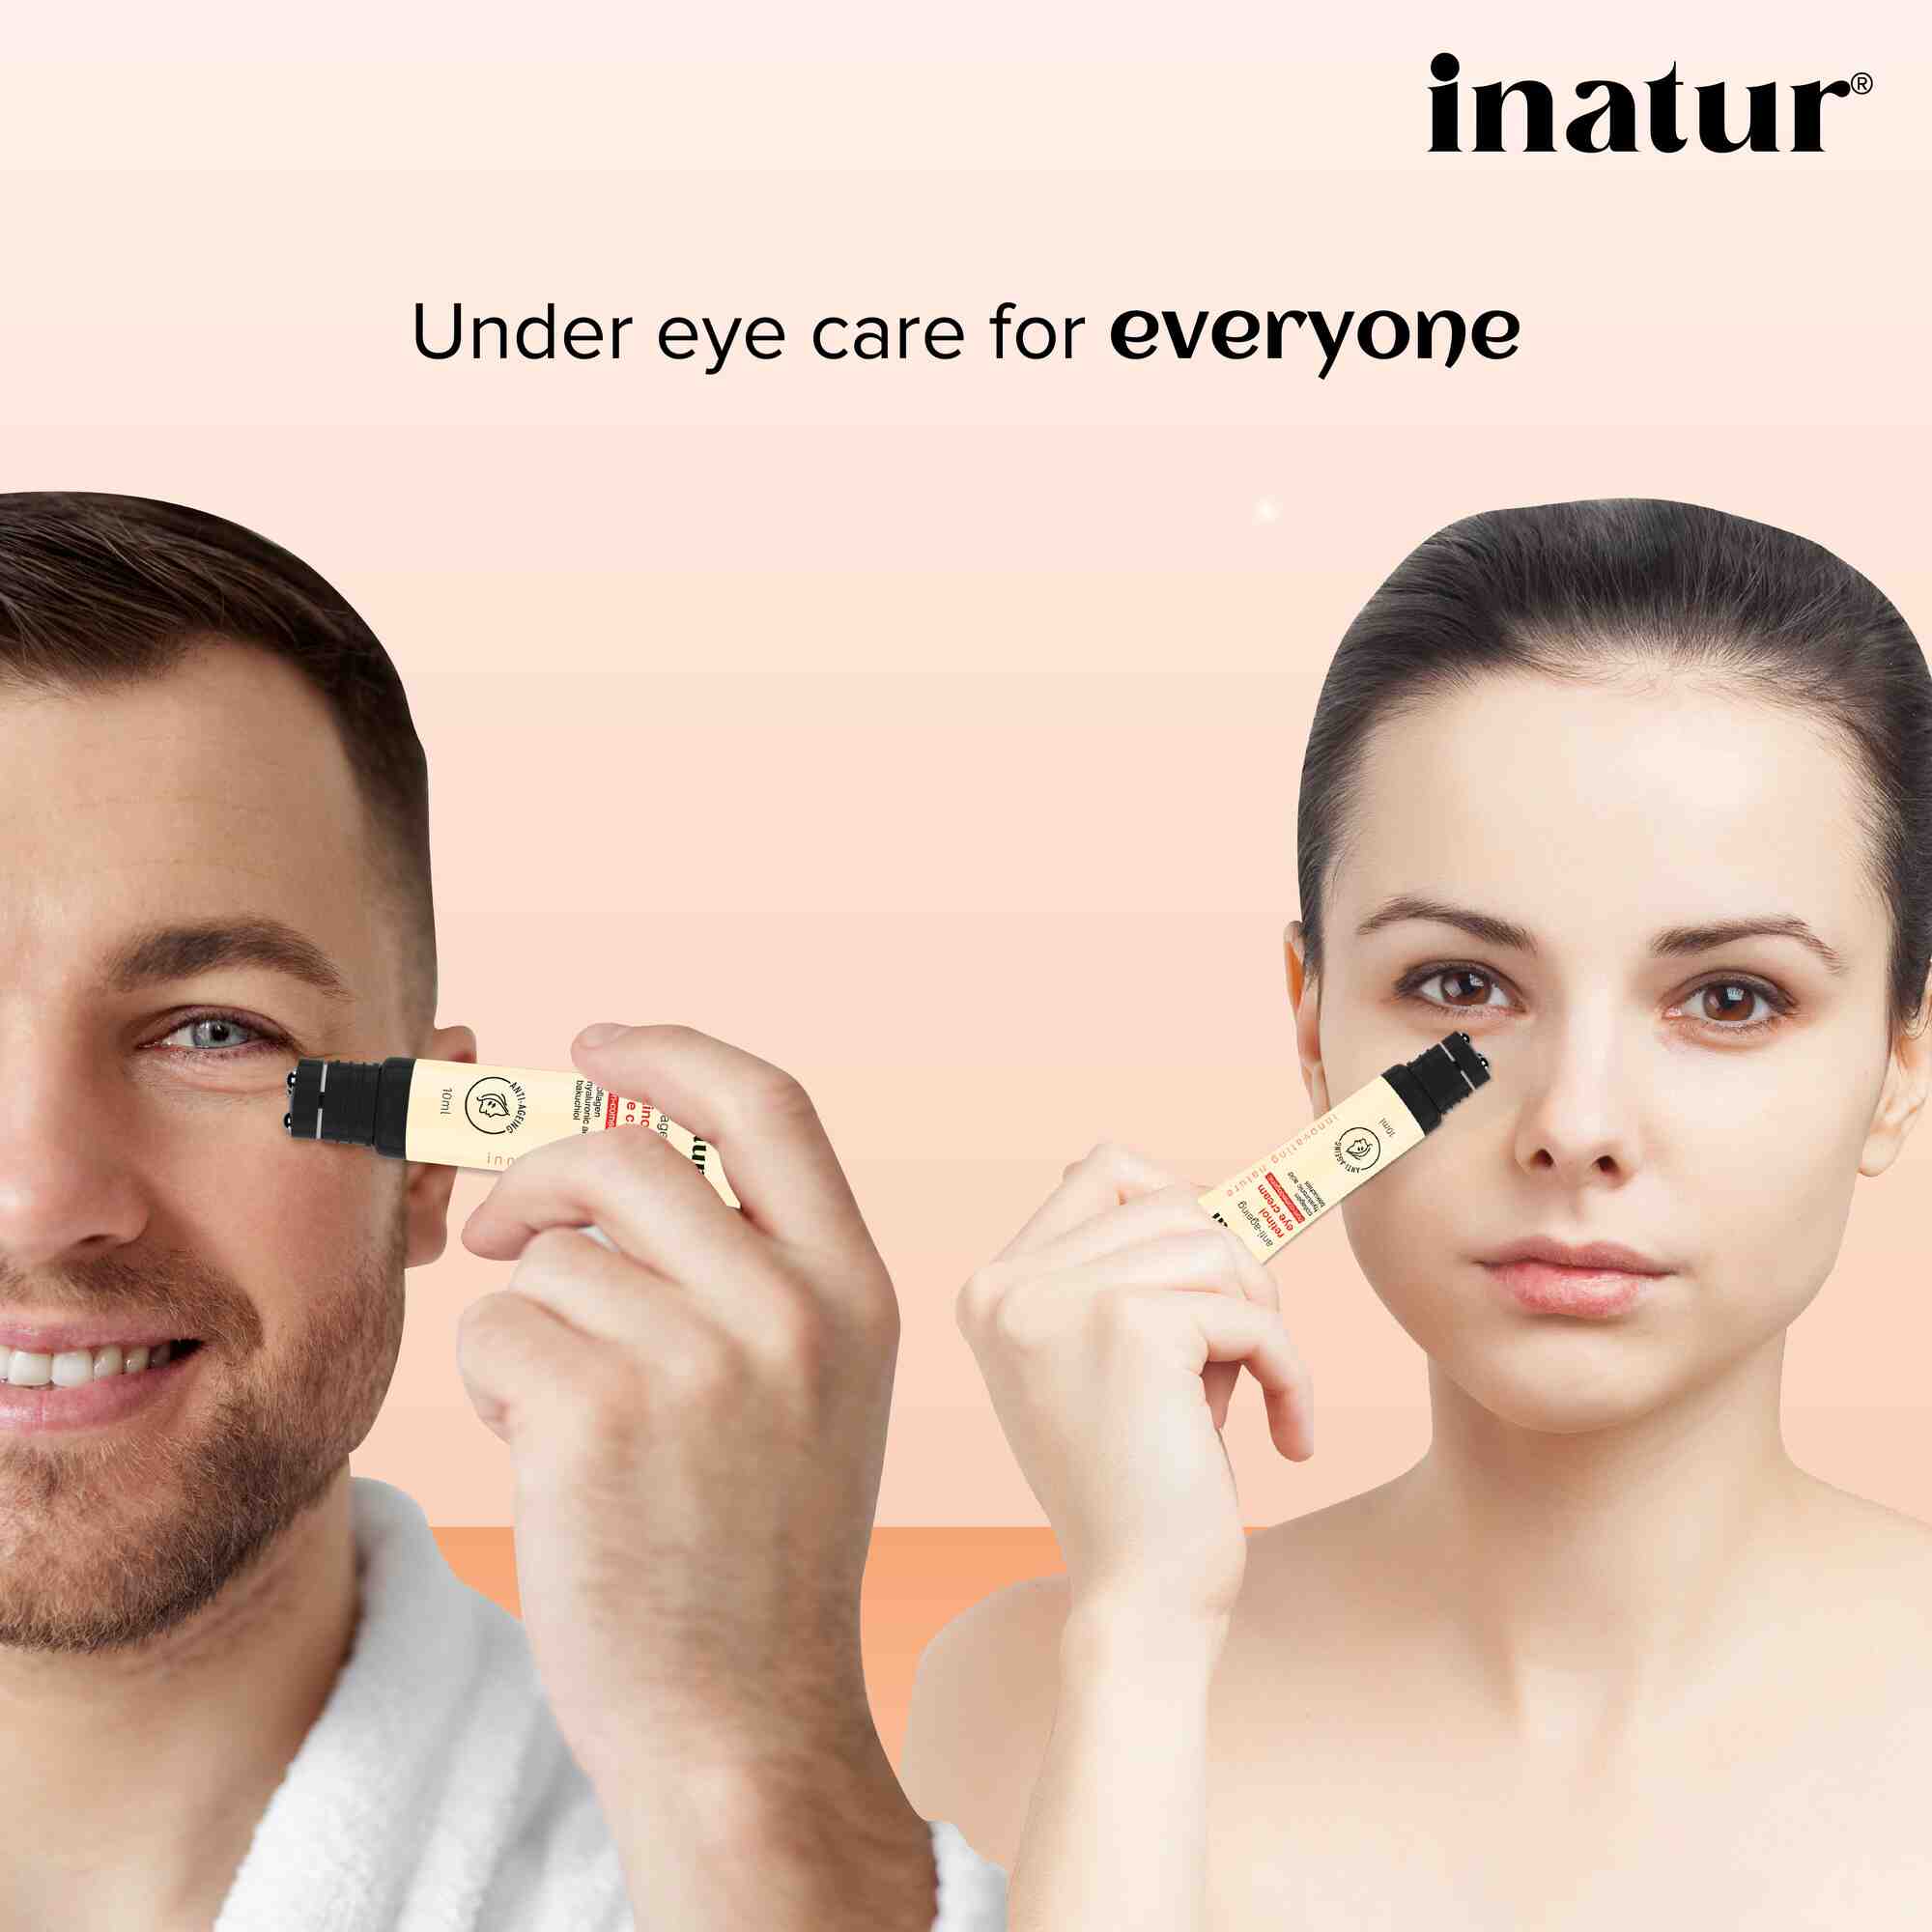 under eye care for everyone